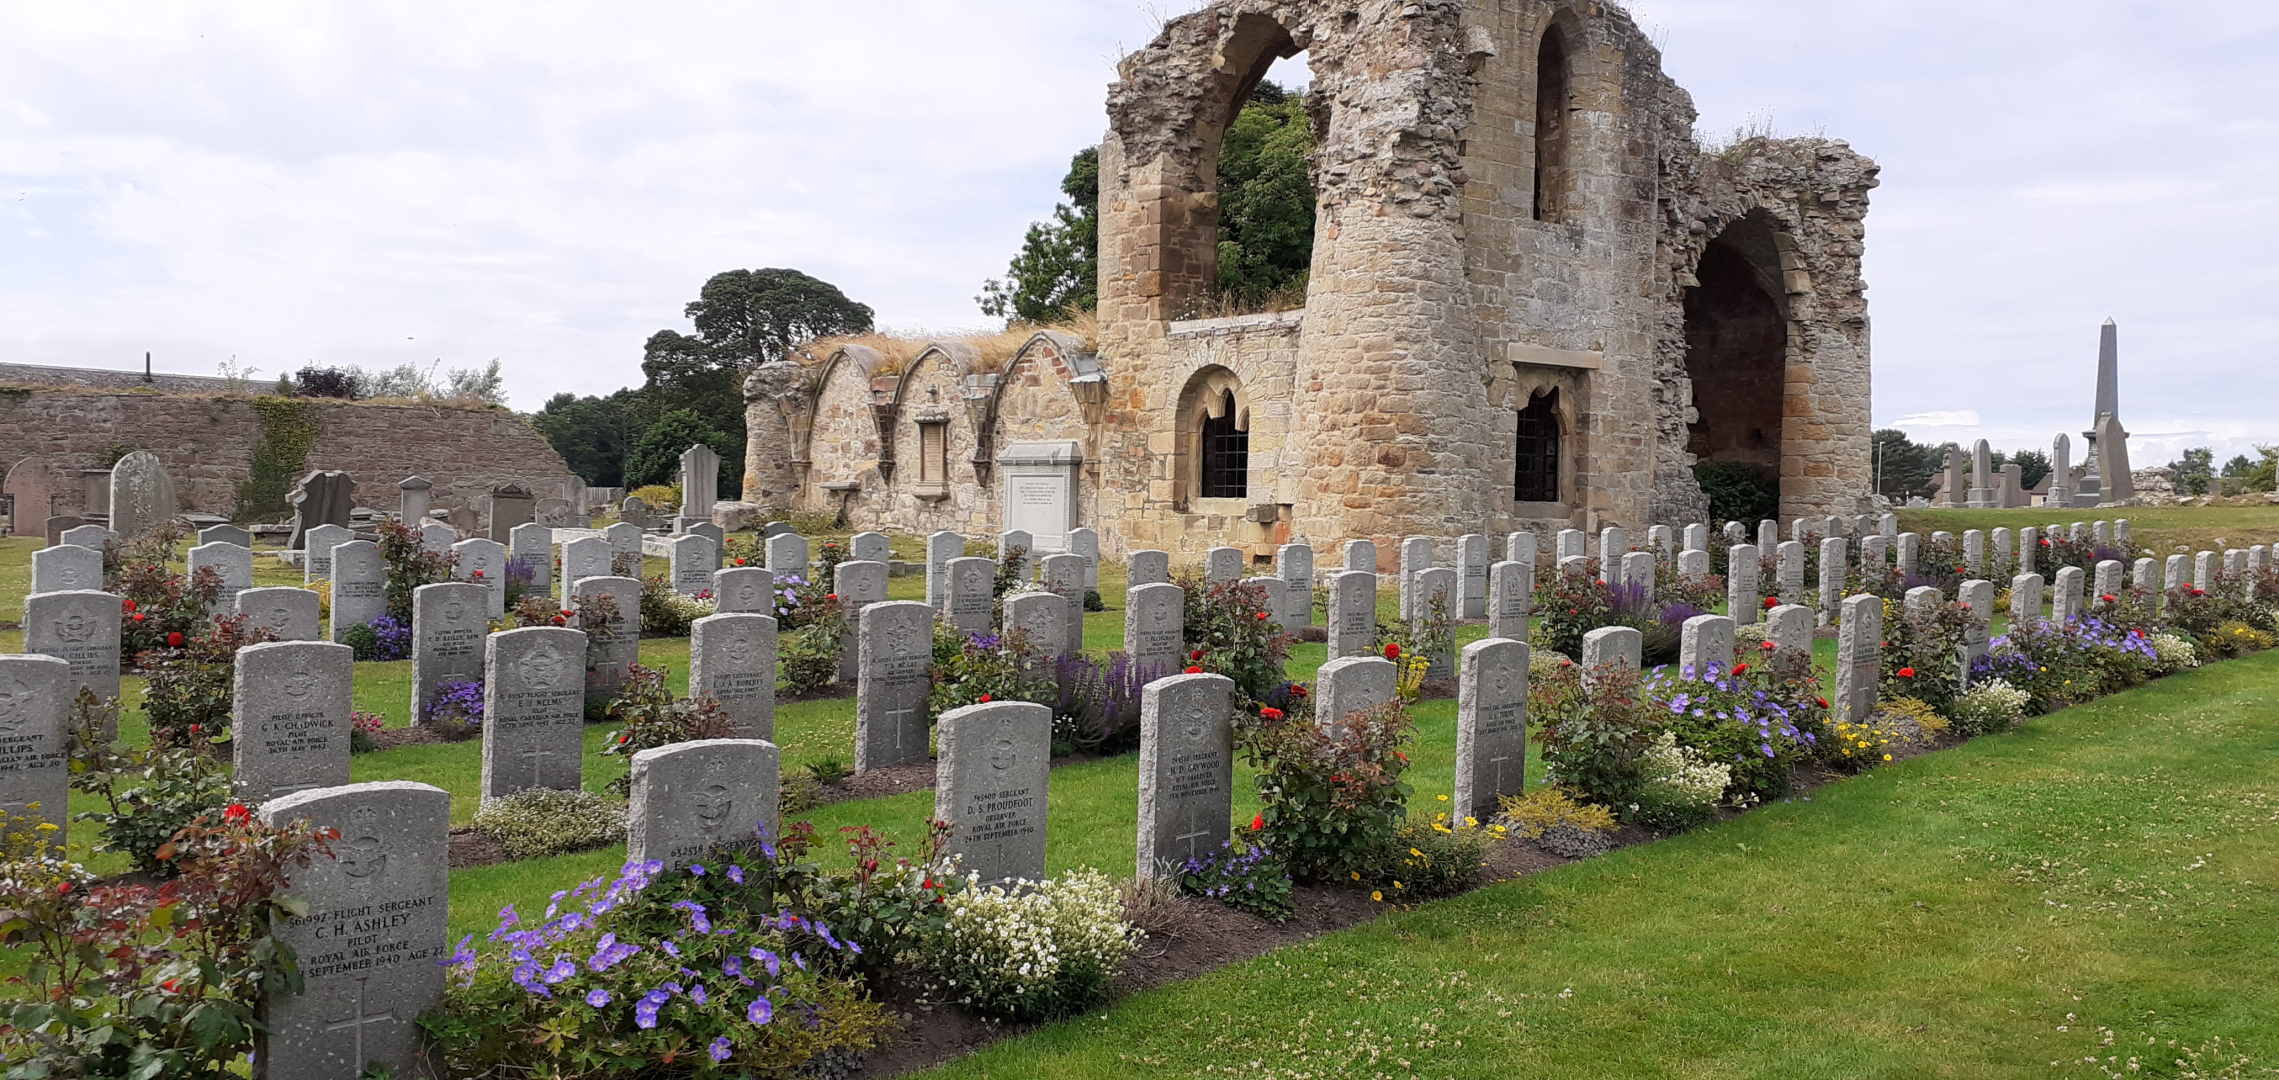 Commonwealth War Graves In Kinloss Abbey Burial Ground, Moray, Scotland. Taken By Anne Marie Kemp.